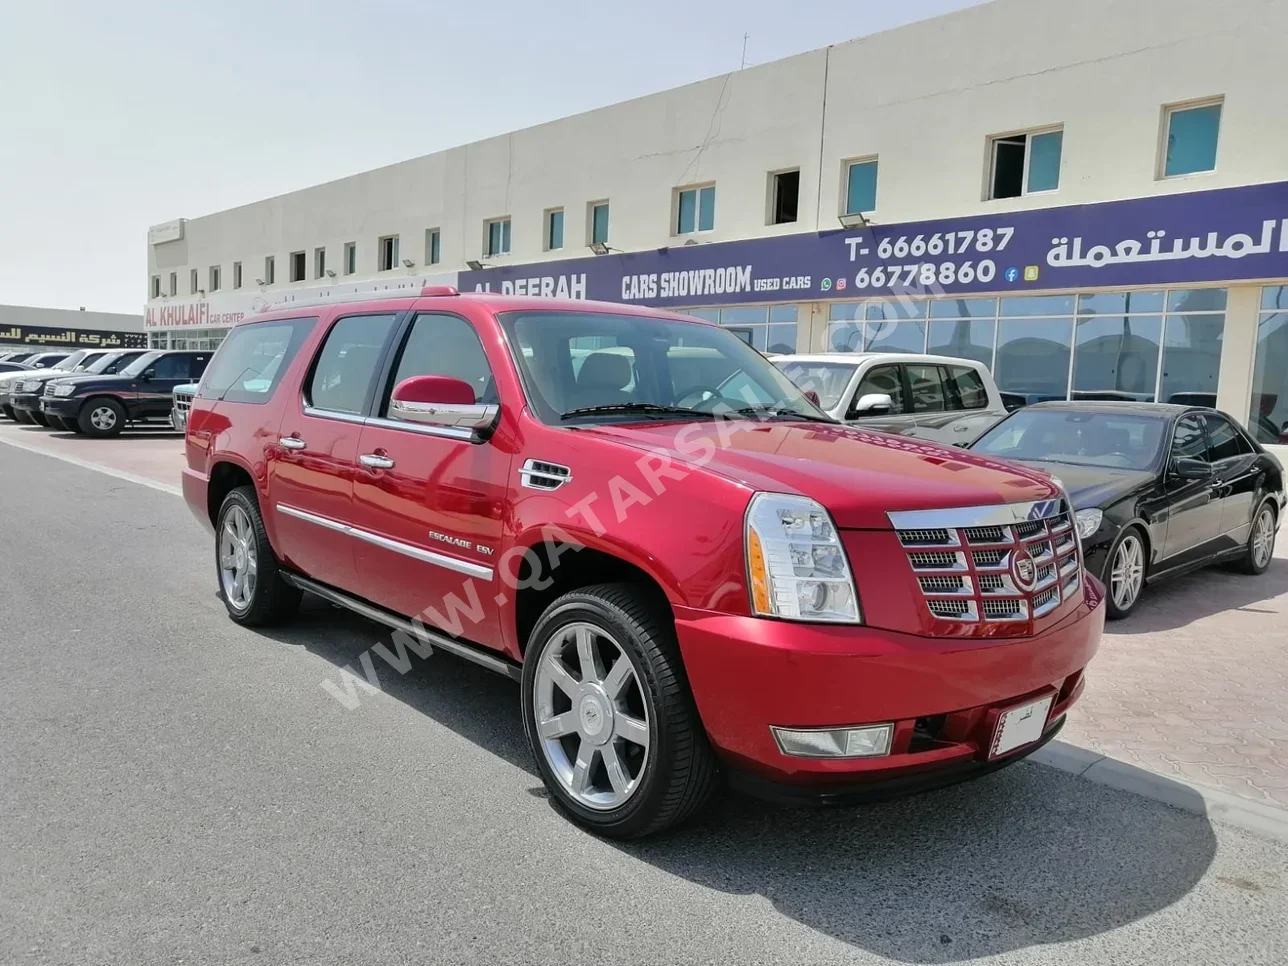 Cadillac  Escalade  2012  Automatic  65,000 Km  8 Cylinder  Four Wheel Drive (4WD)  SUV  Red